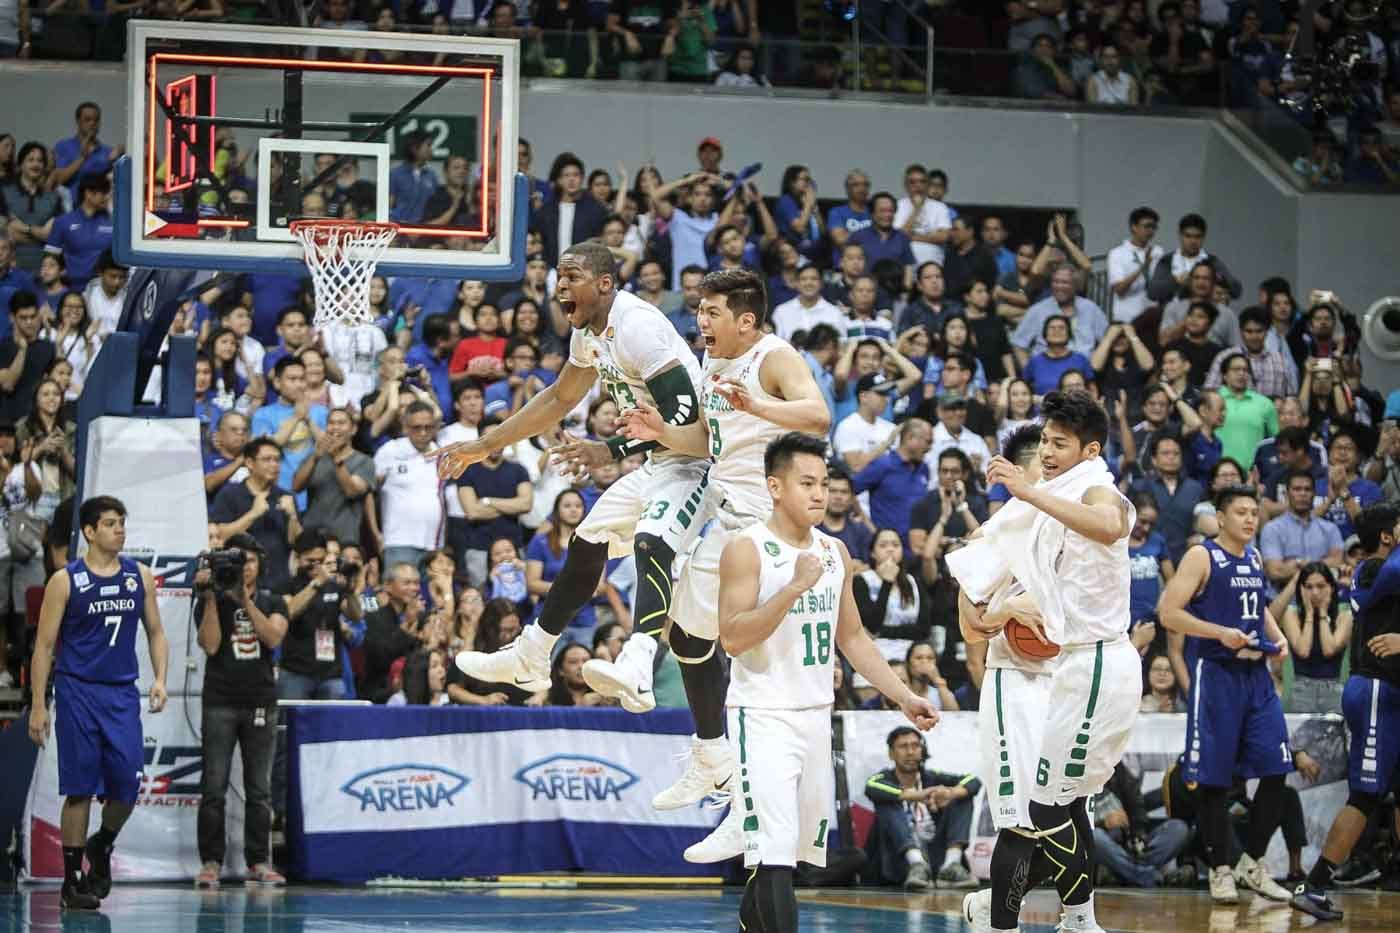 IN PHOTOS: Stars come out for Game 1 of Ateneo-La Salle UAAP Finals